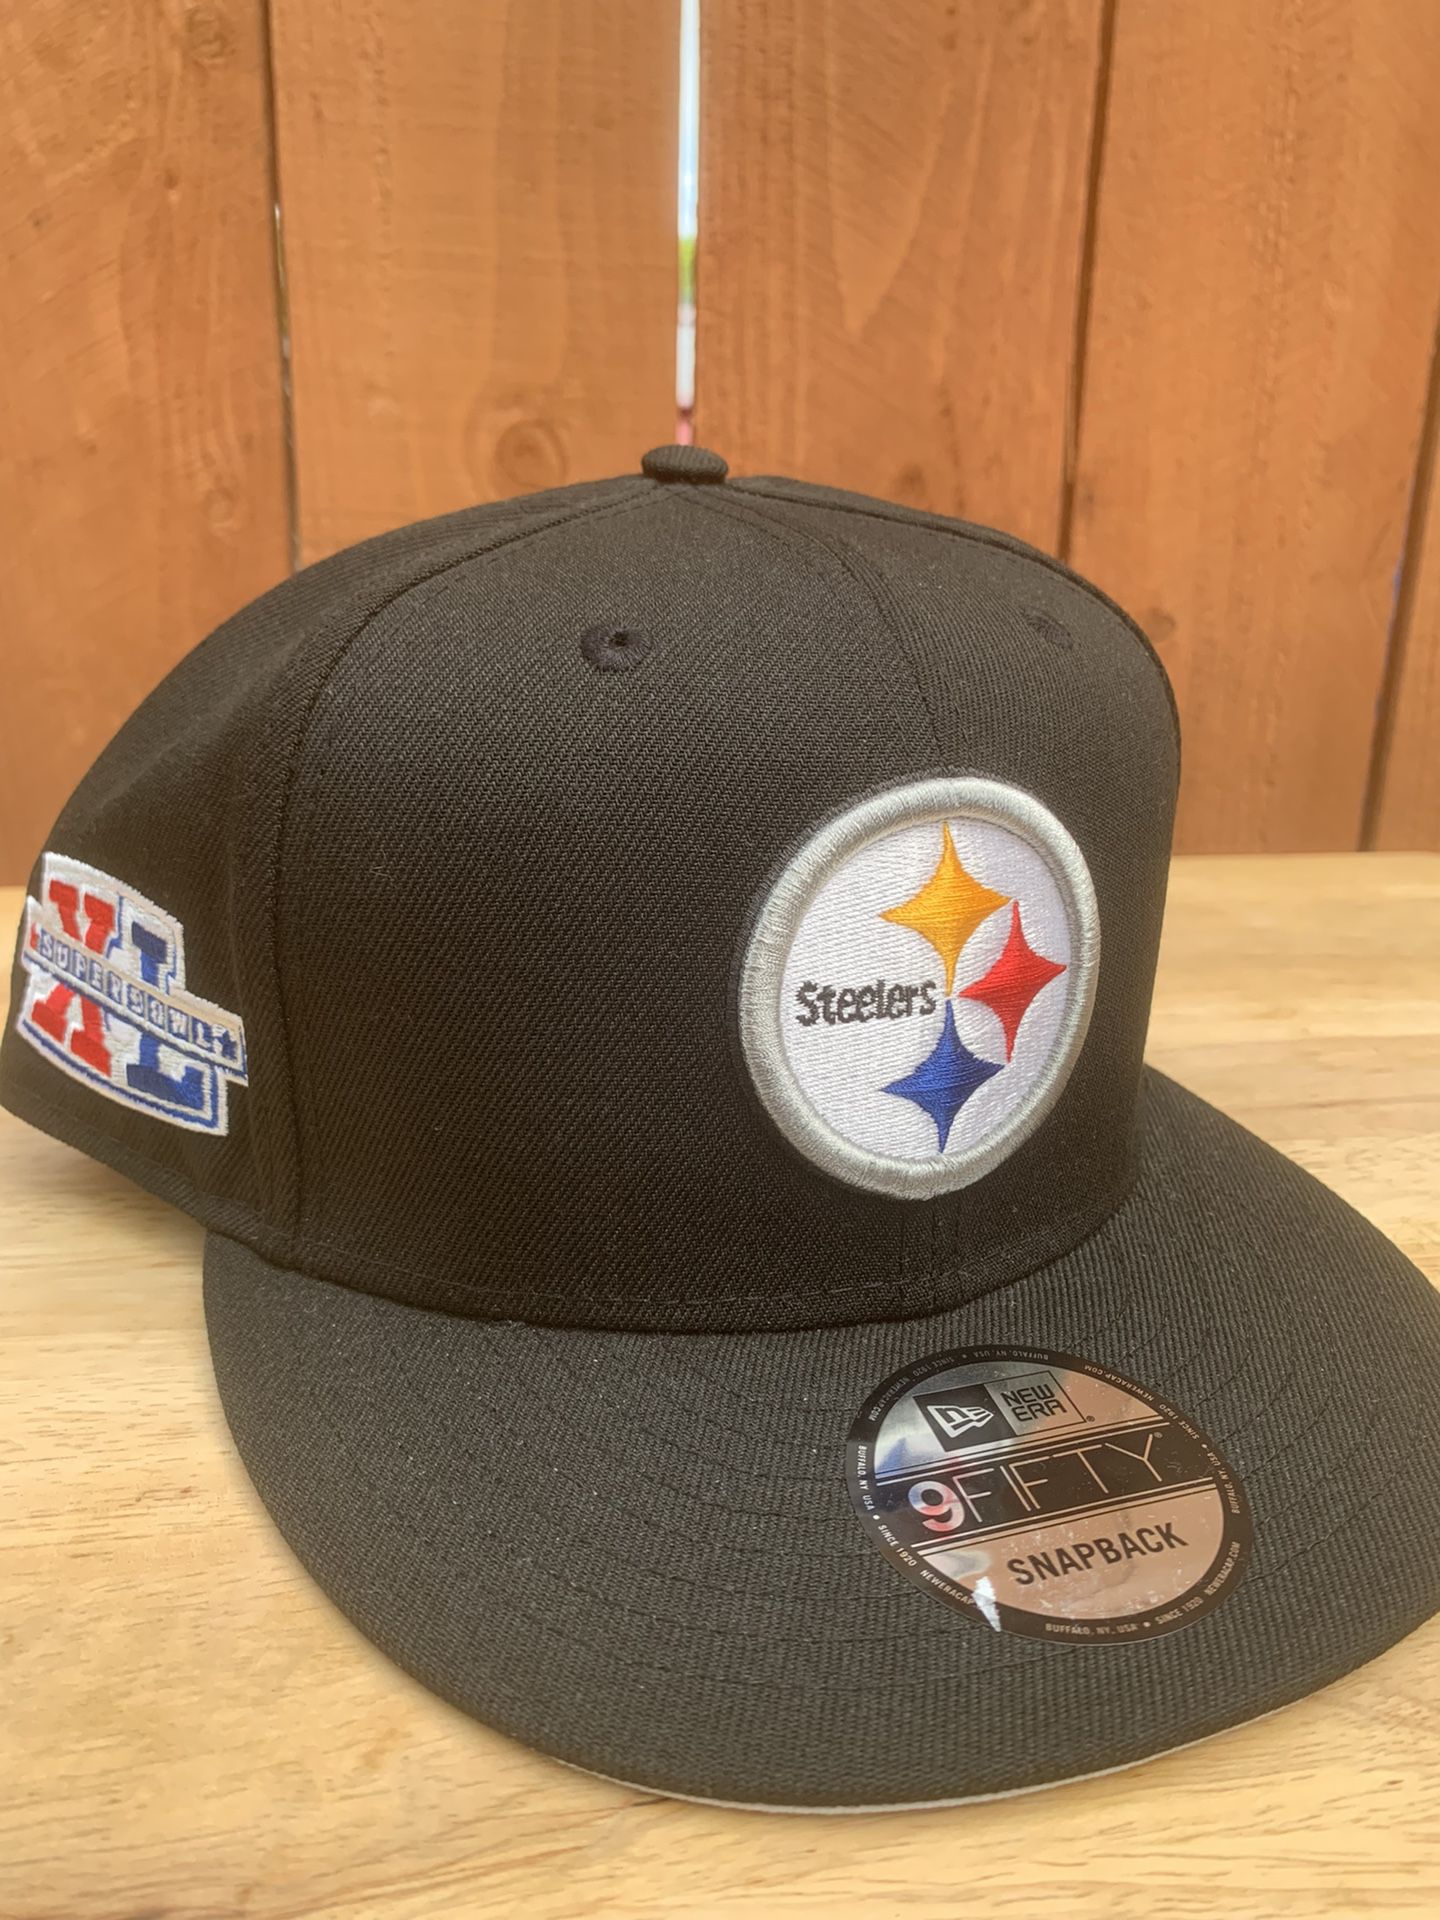 Pittsburgh Steelers XL Super Bowl Patch New Era Snap Back 59fifty